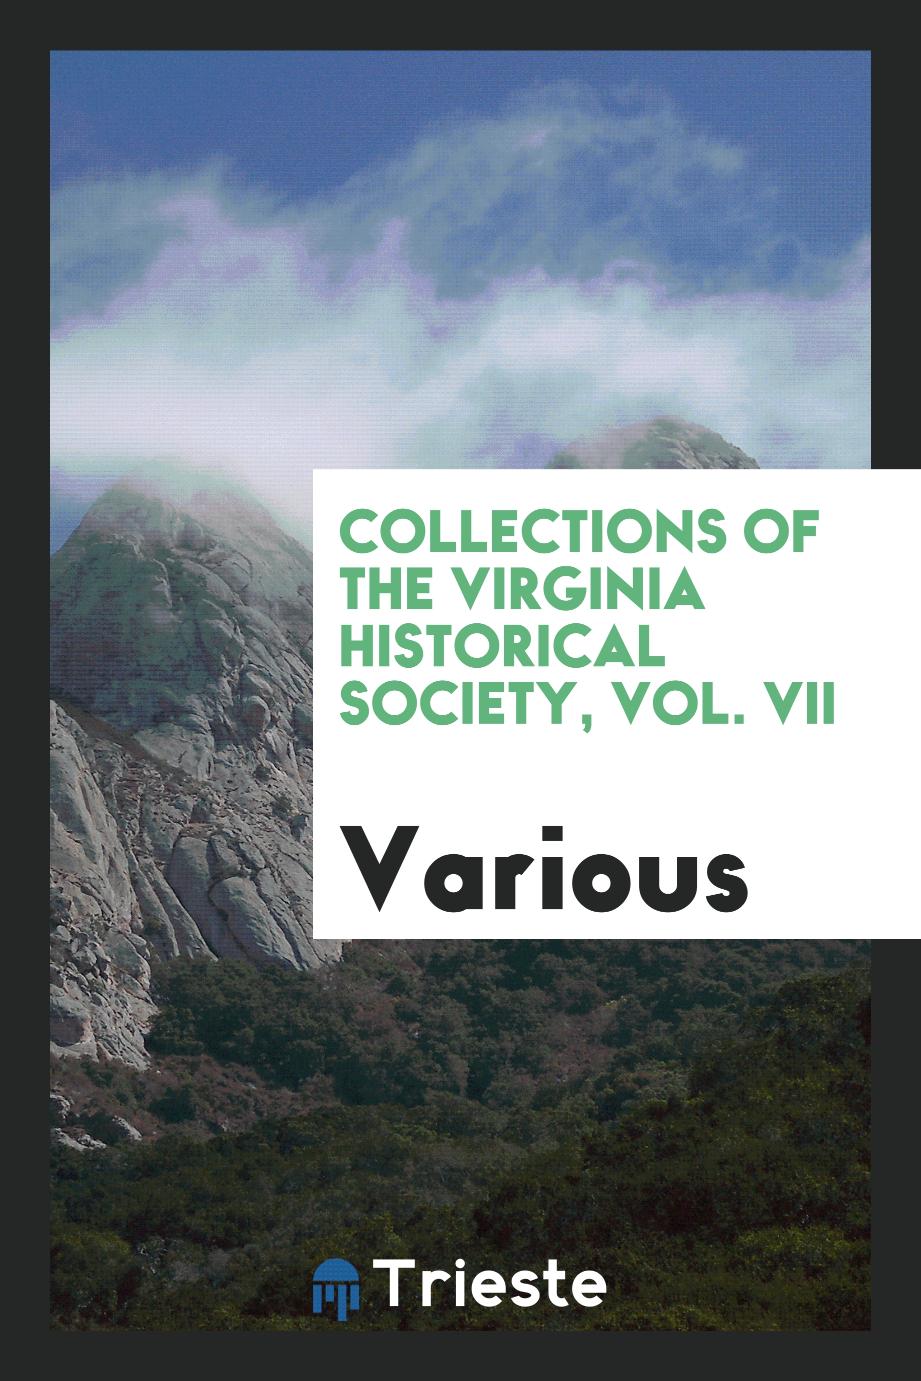 Collections of The Virginia Historical Society, Vol. VII